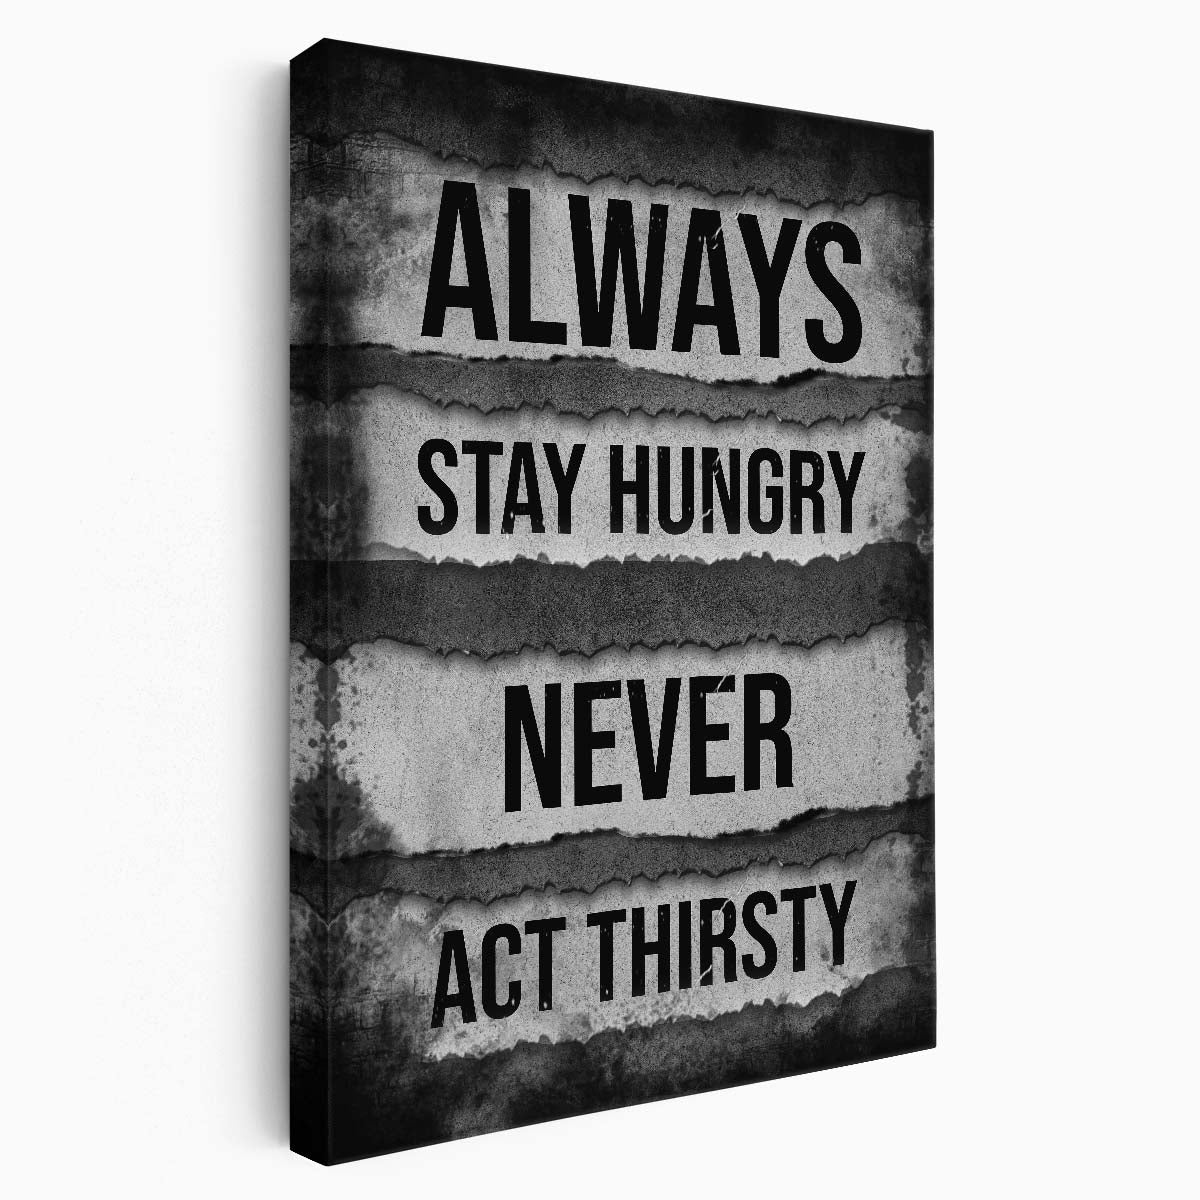 Always Stay Hungry Never Act Thirsty Wall Art by Luxuriance Designs. Made in USA.